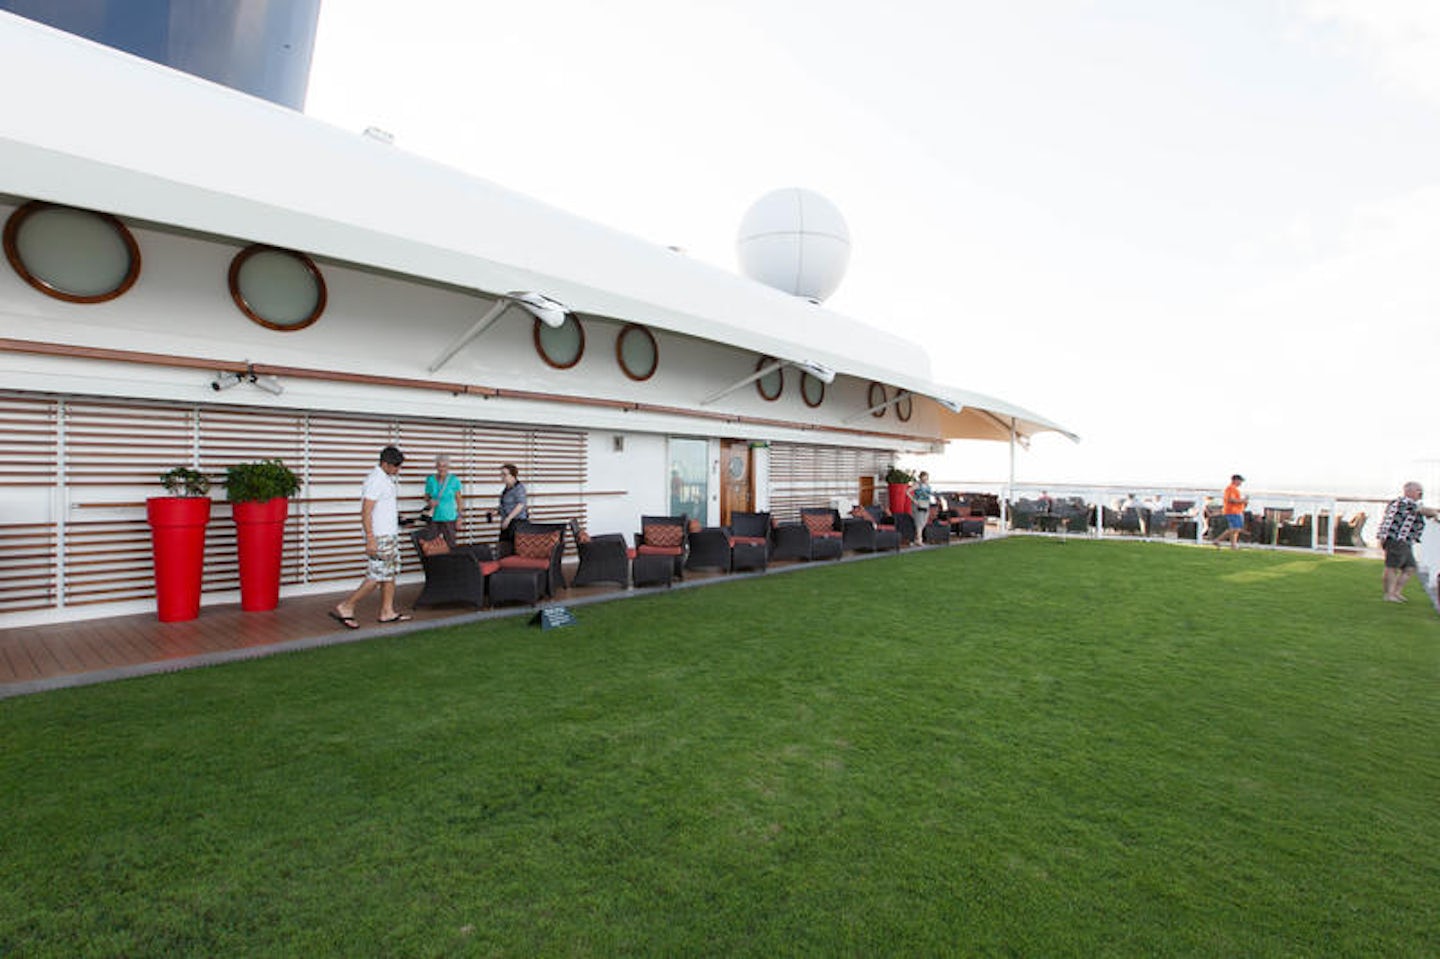 The Lawn Club on Celebrity Silhouette